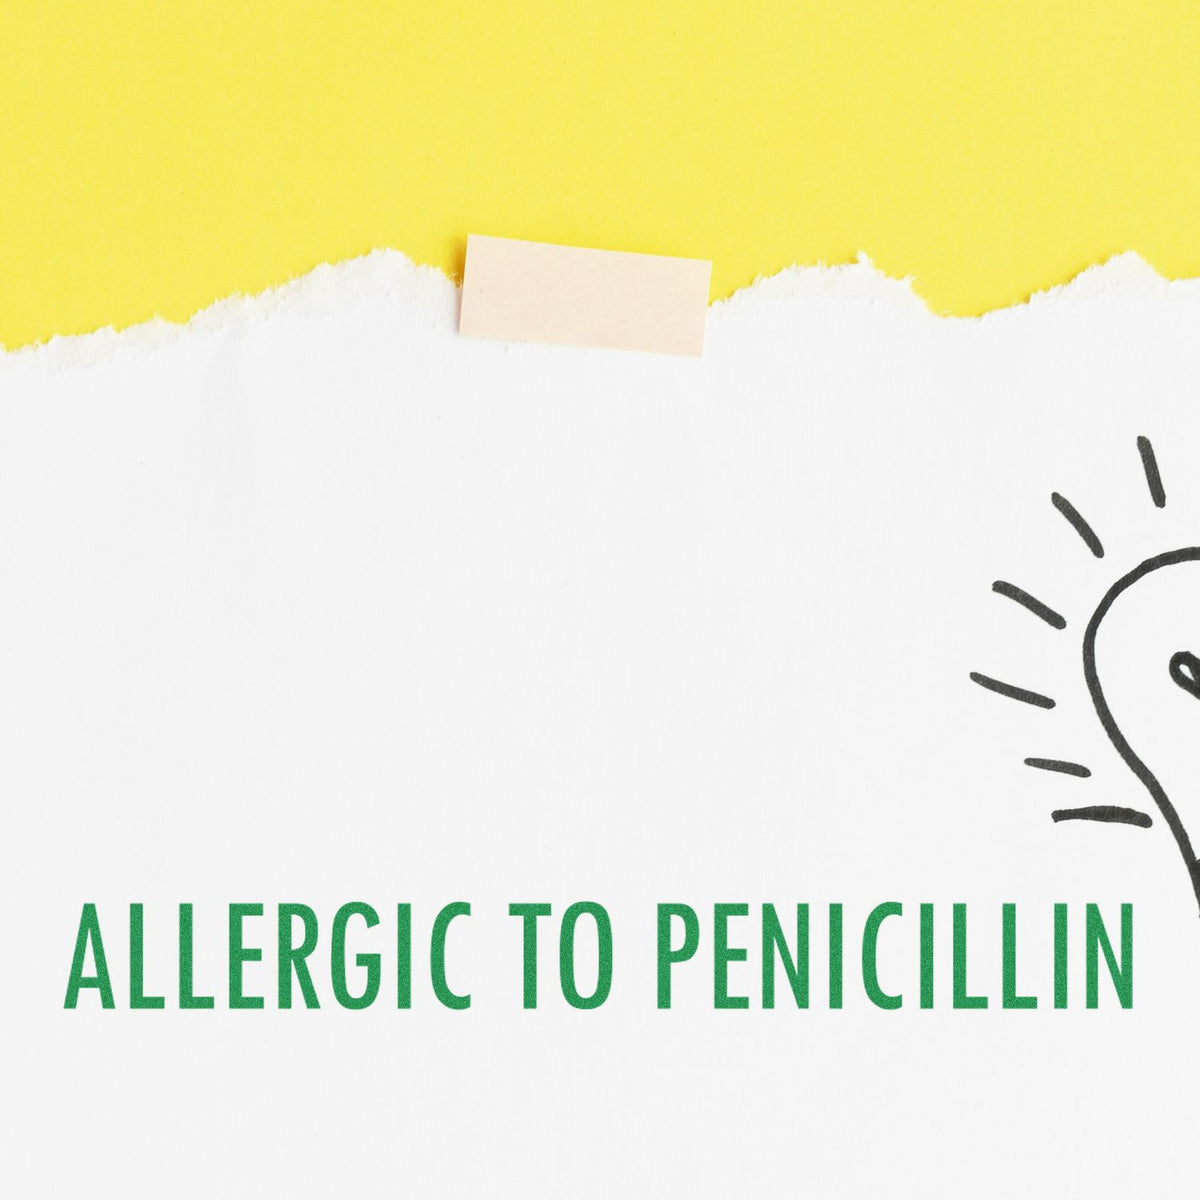 Large Pre-Inked Allergic To Penicillin Stamp In Use